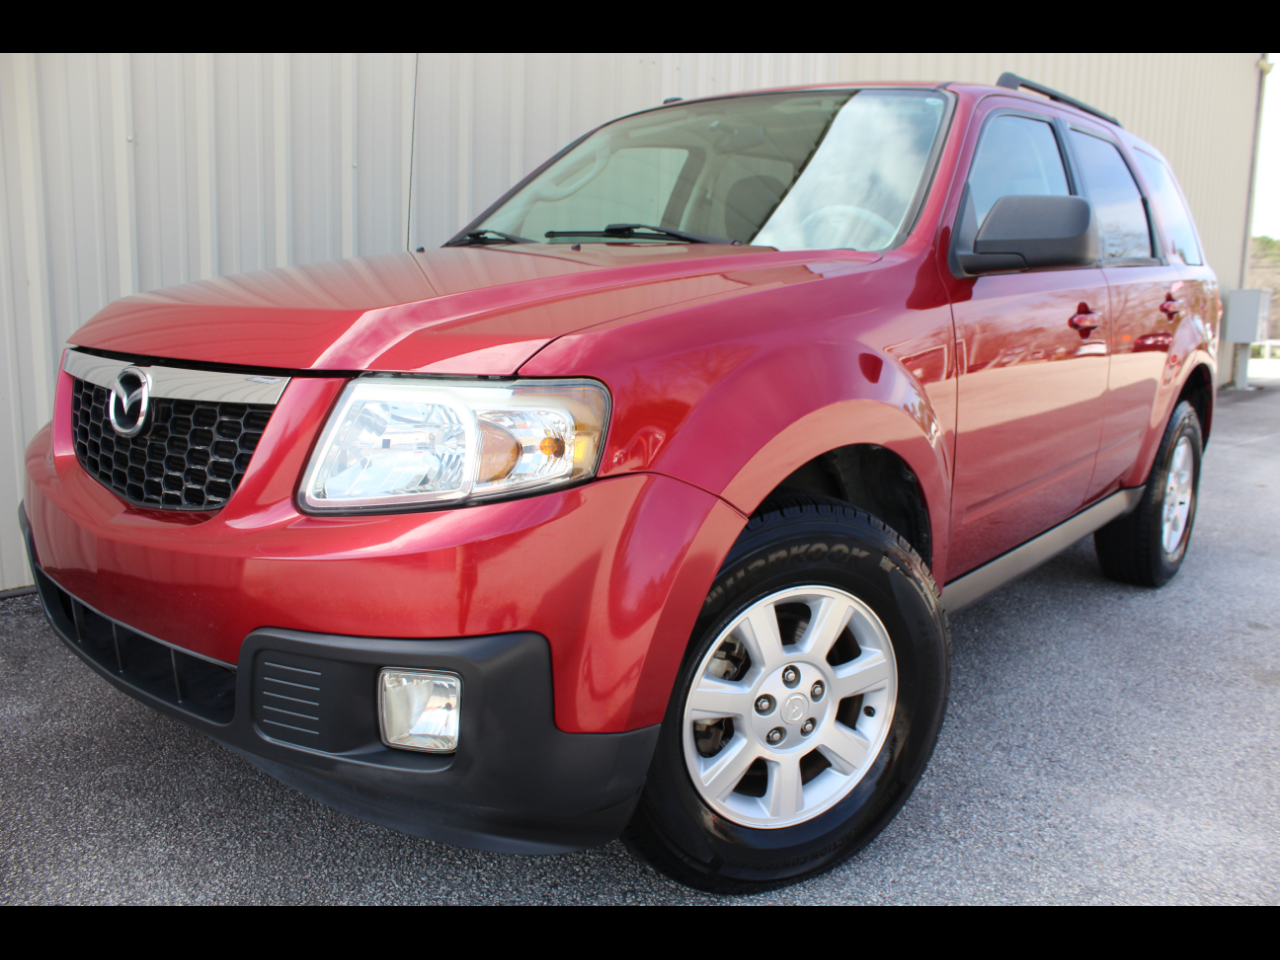 Used 2009 Mazda Tribute's nationwide for sale - MotorCloud